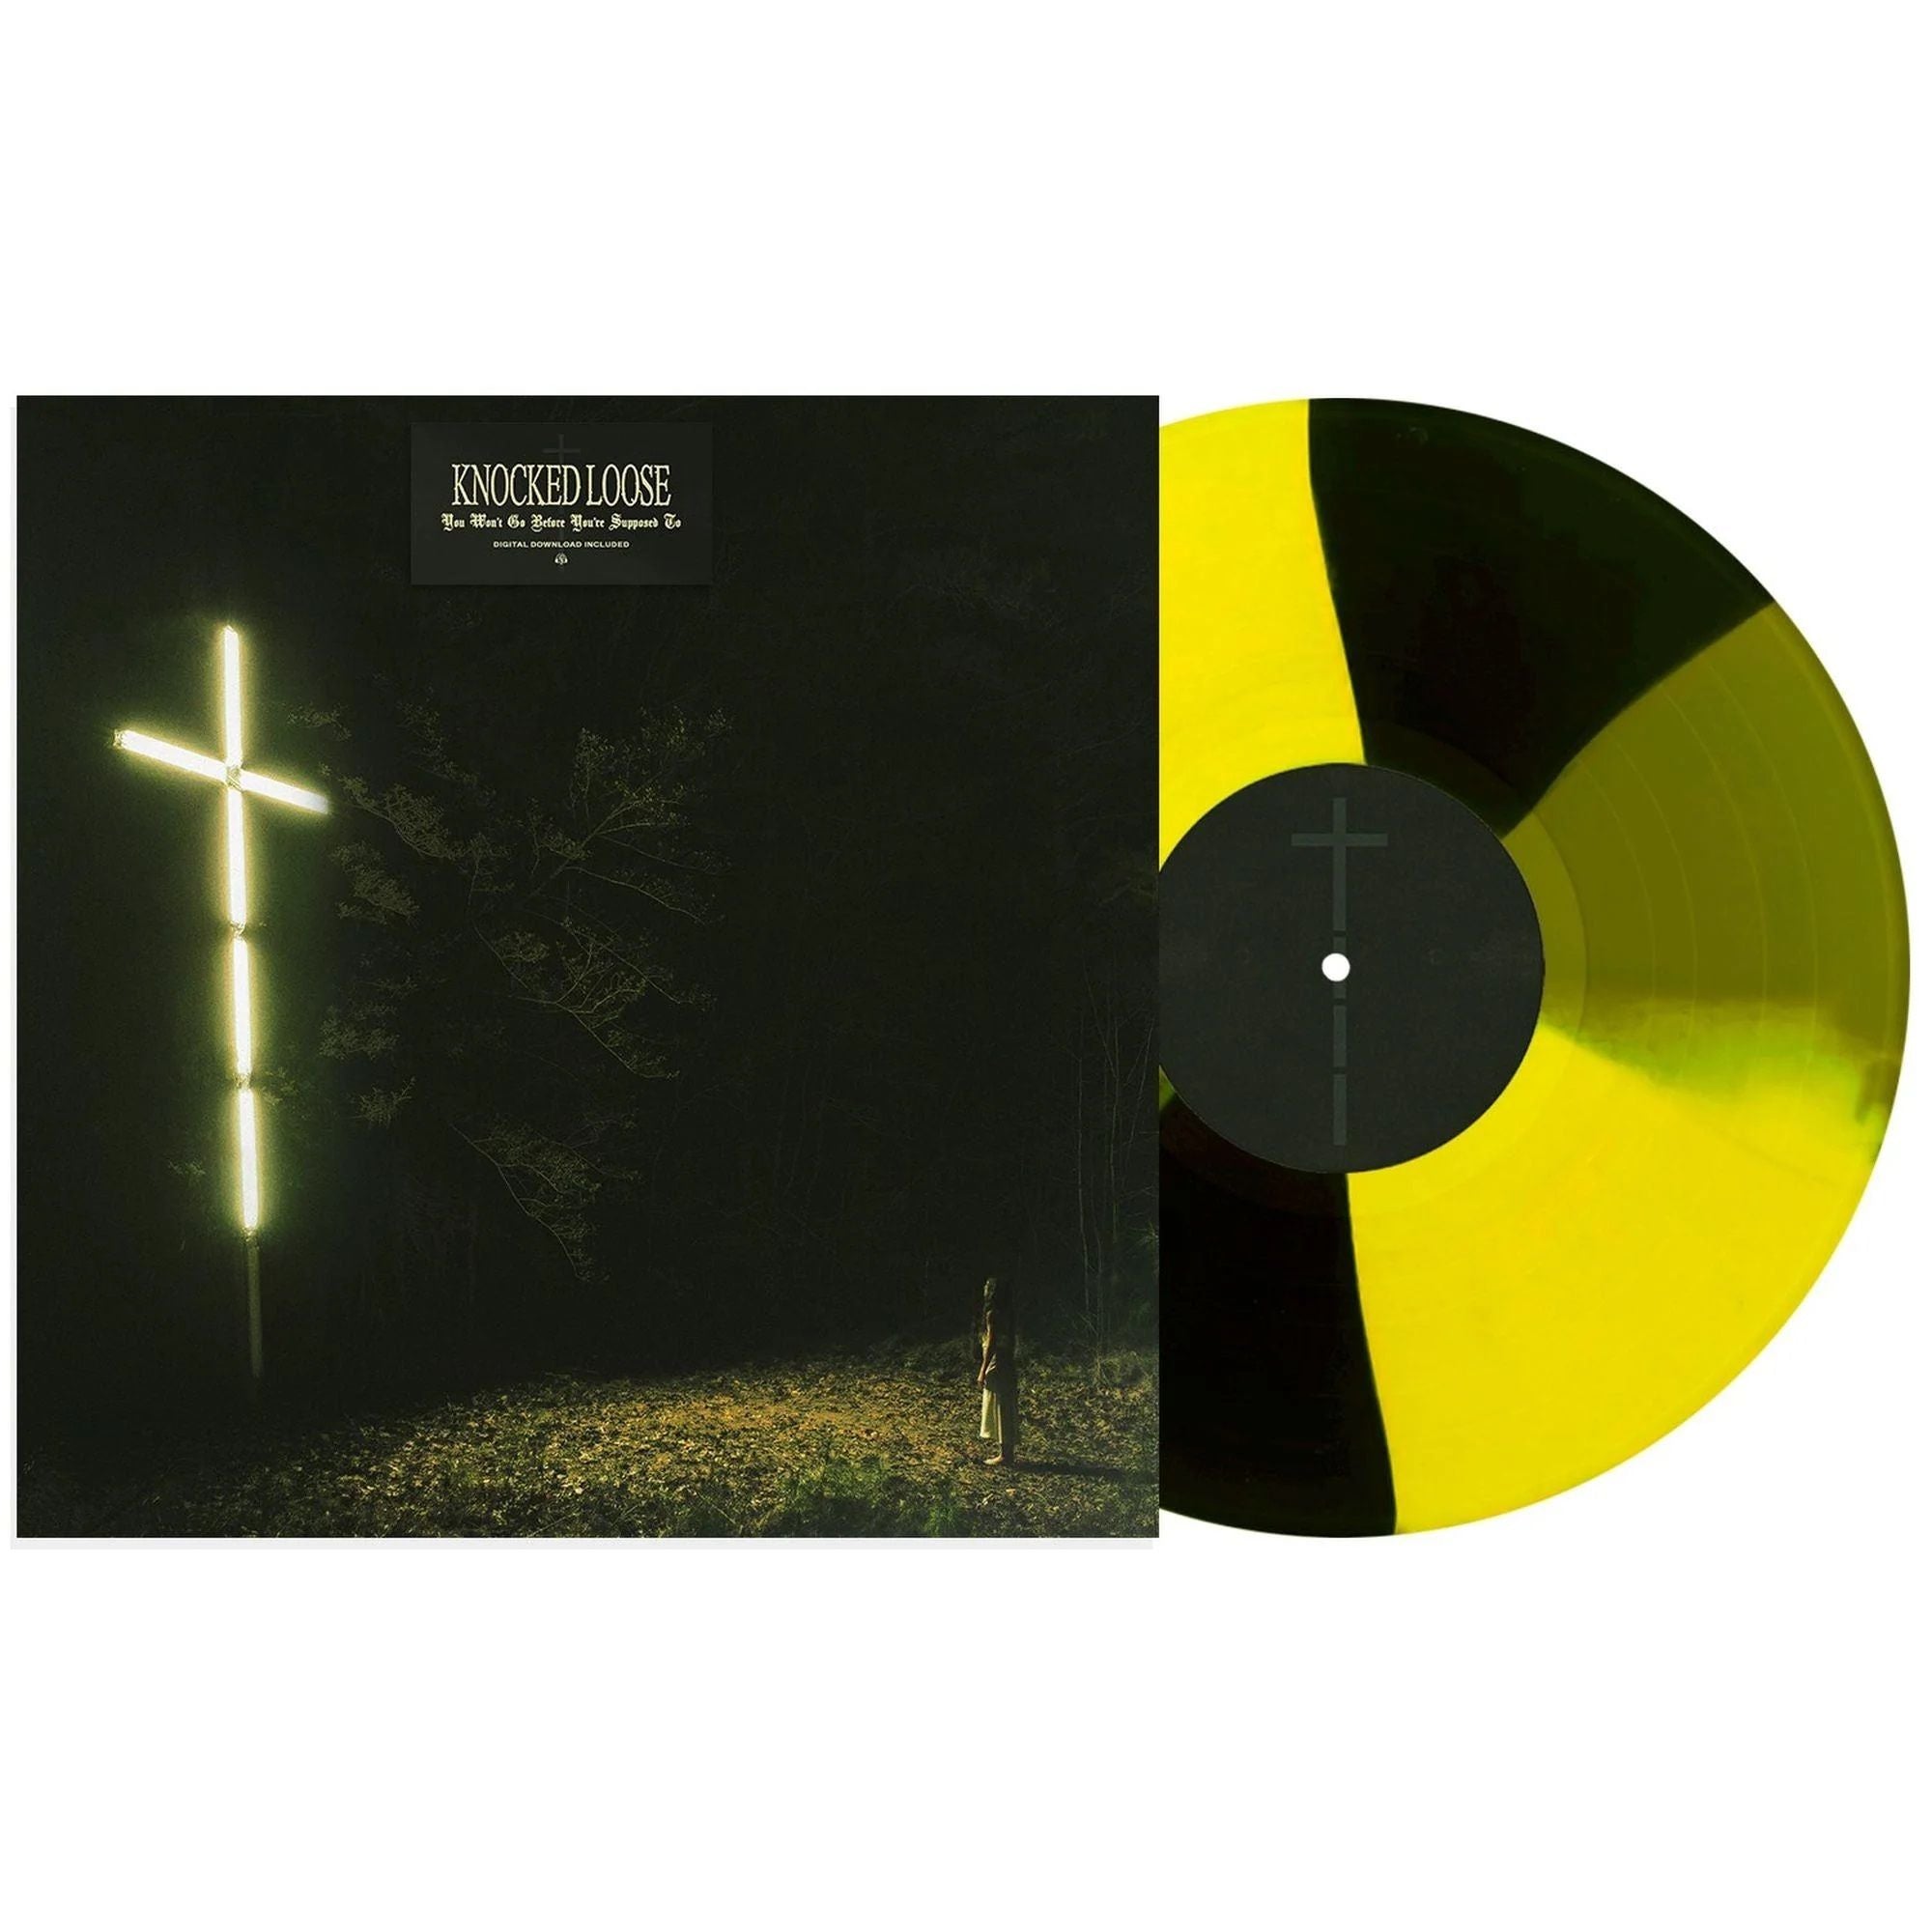 Knocked Loose - You Won't Go Before You're Supposed To (Ltd. Ed. Aust. Exclusive Green, Yellow & Black Twist vinyl gatefold with download - 500 copies) - Vinyl - New